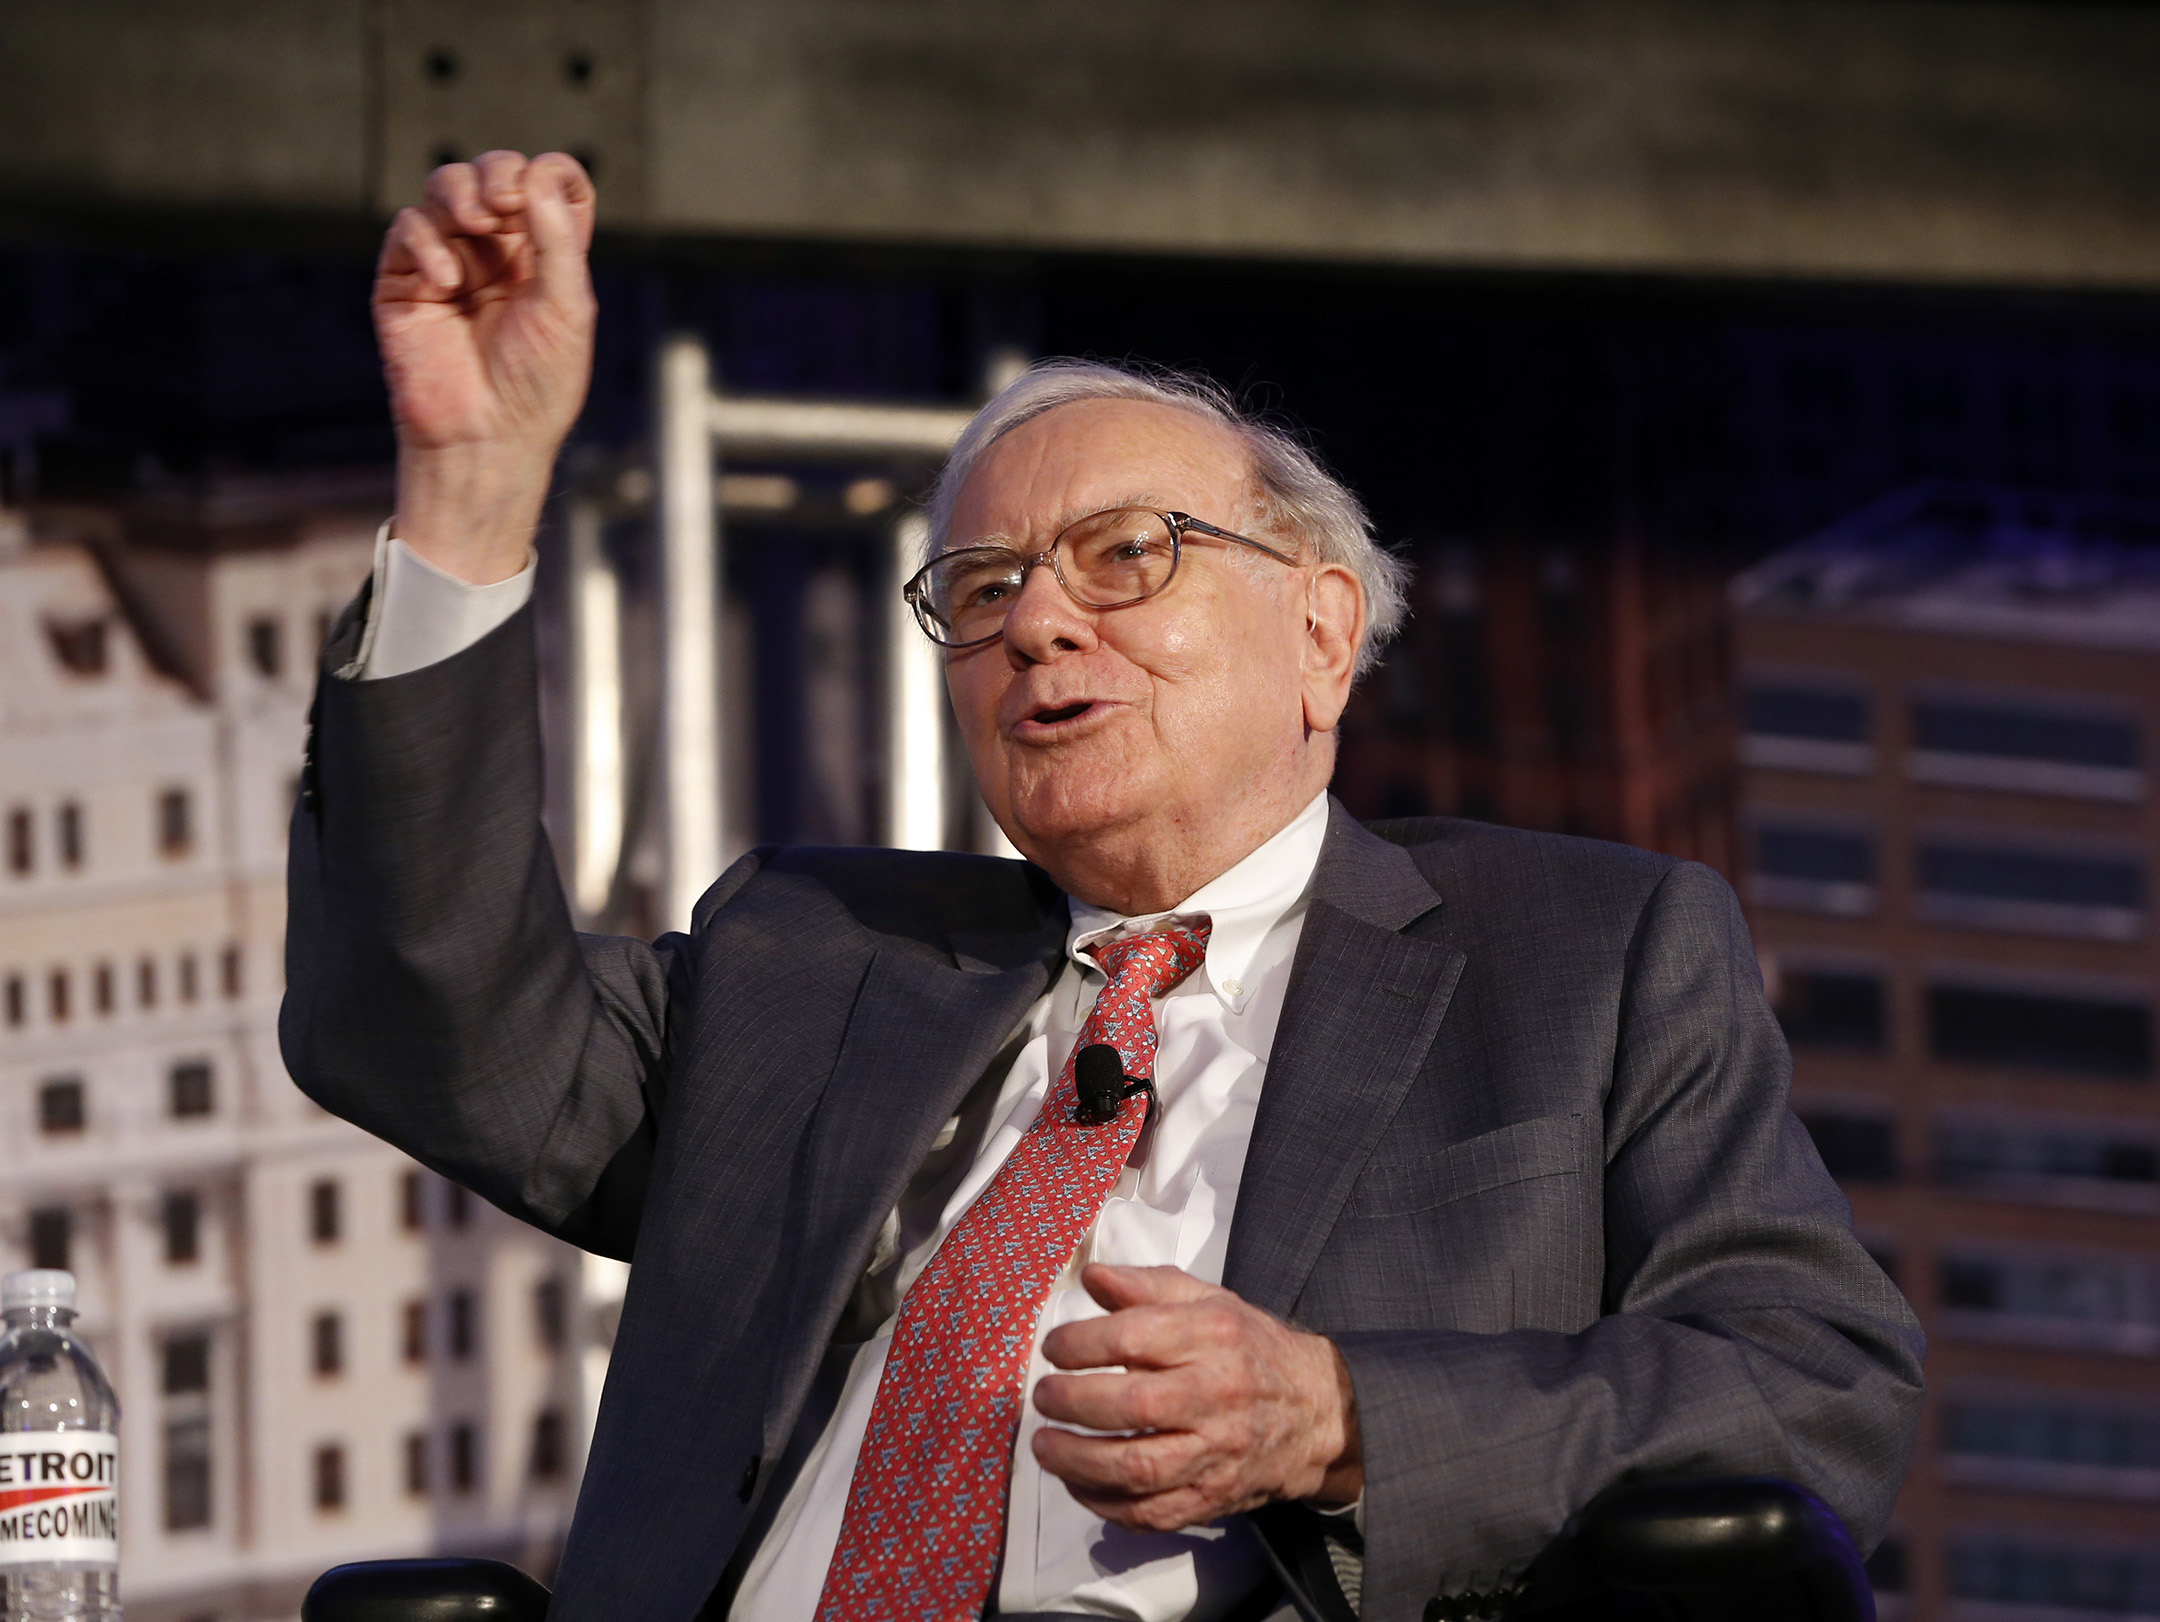 Last June, Warren Buffett said he was prepared to double his company’s commitment to renewable energy.
